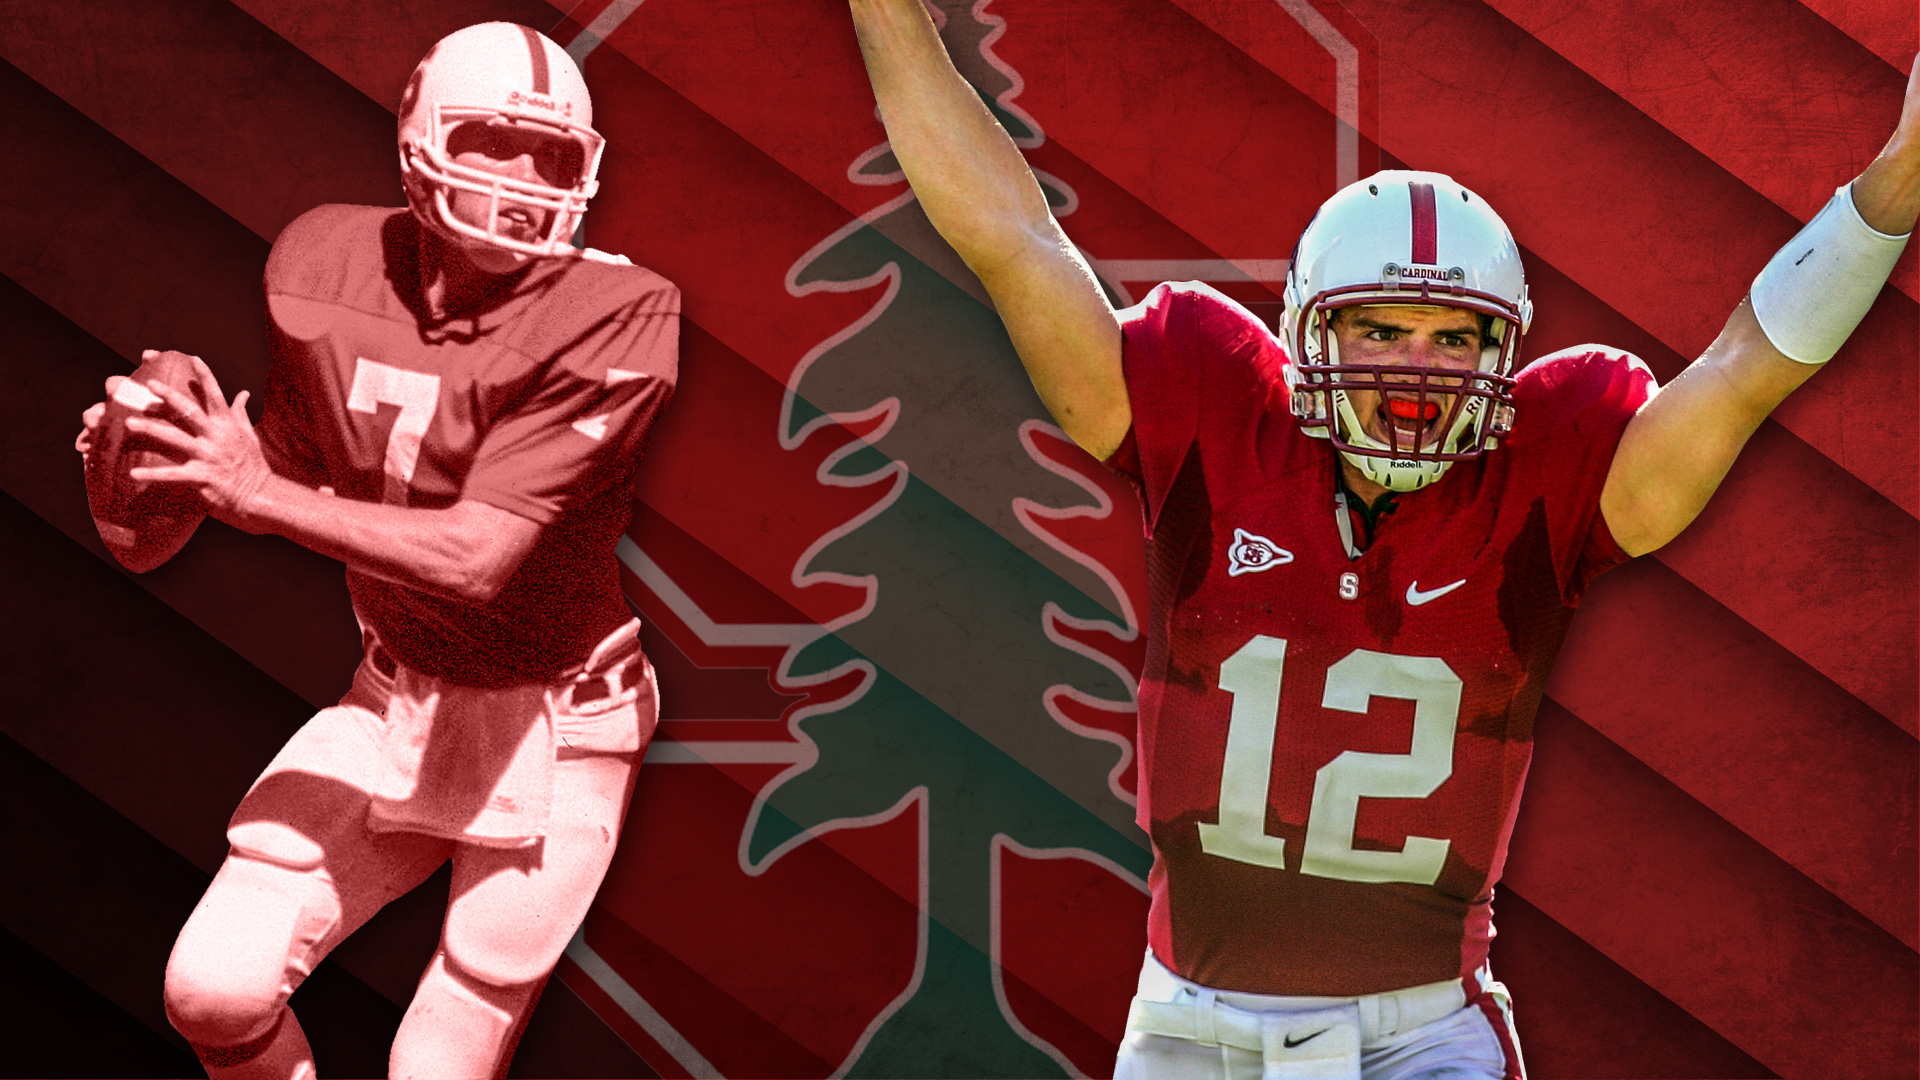 Stanford Cardinal Football Wallpapers